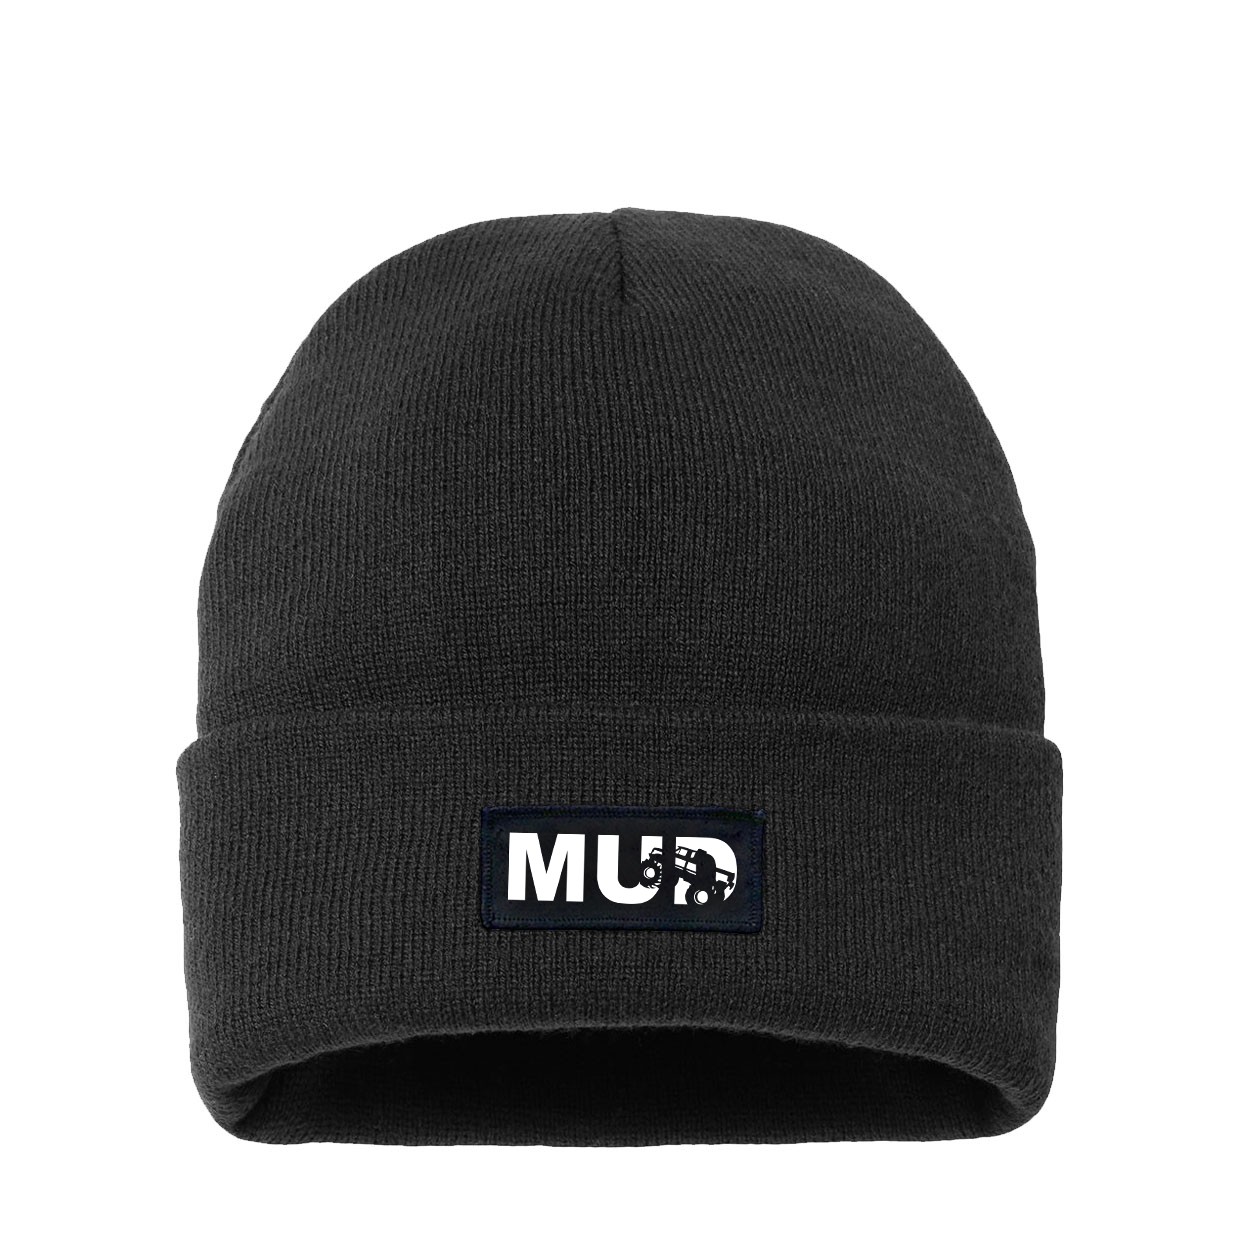 Mud Truck Logo Night Out Woven Patch Night Out Sherpa Lined Cuffed Beanie Black (White Logo)